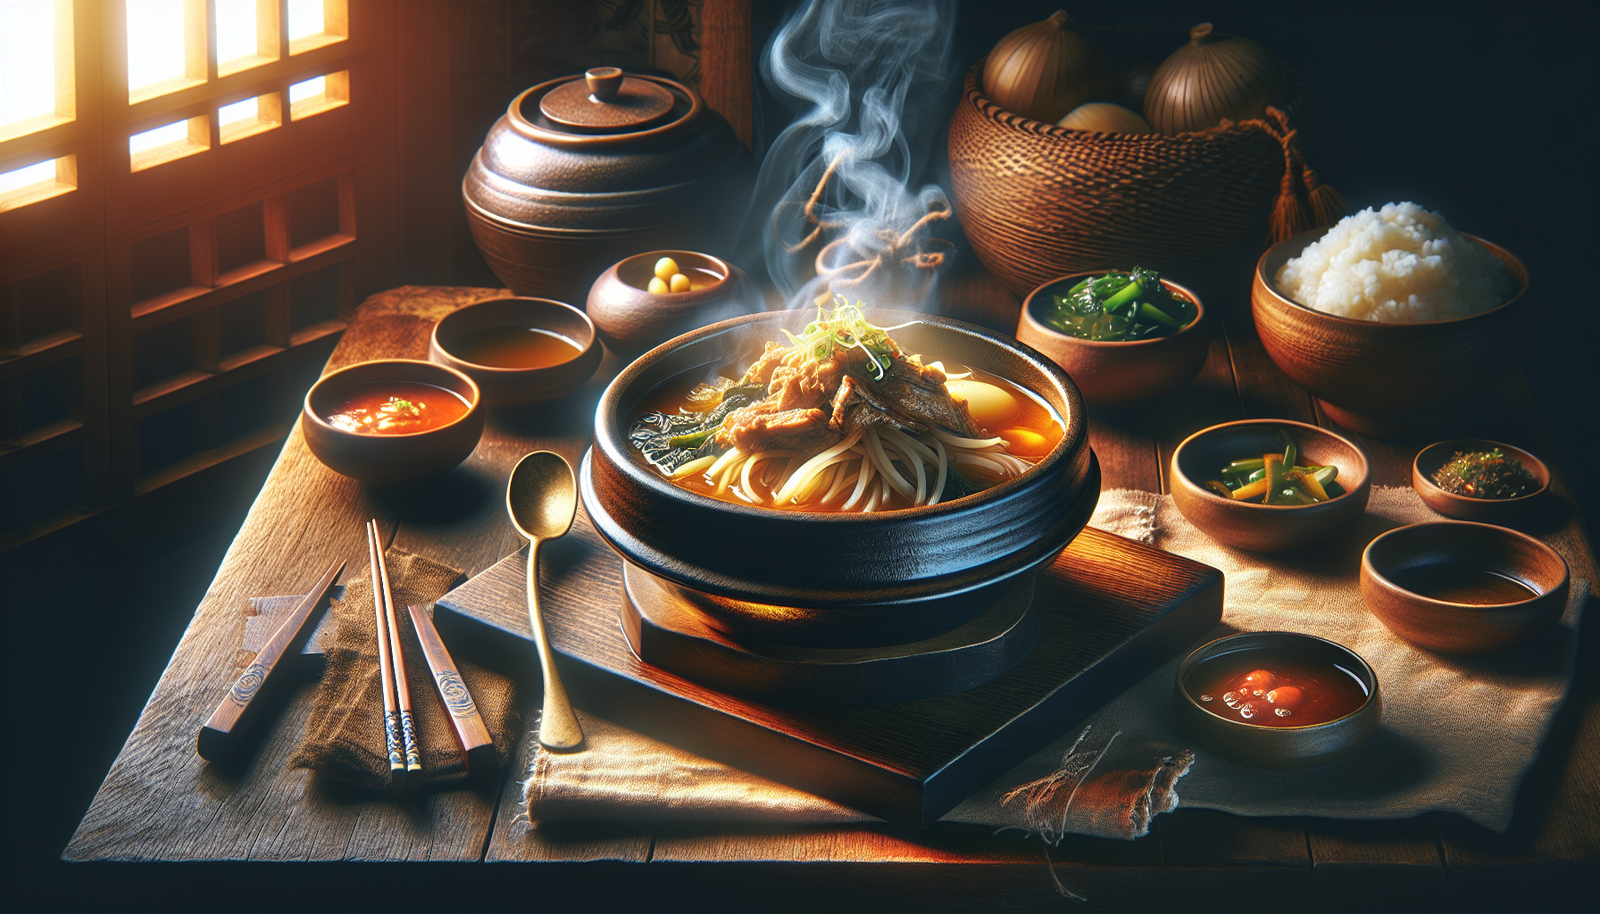 Can You Recommend Korean Dishes That Are Considered Comfort Food?